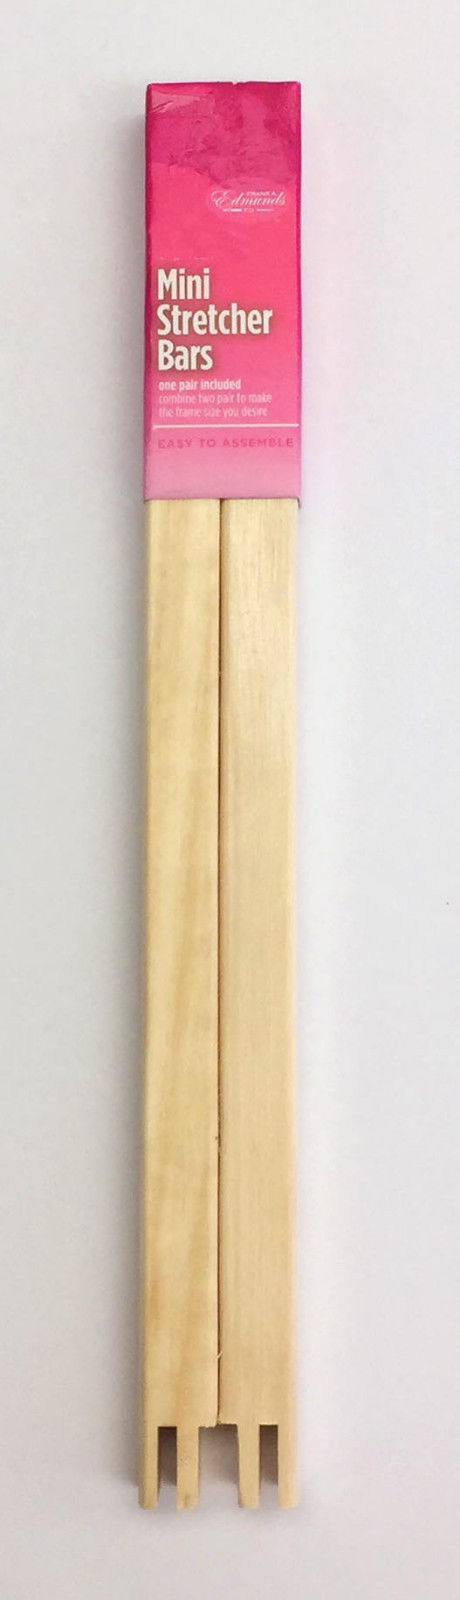 1 PAIR 13" Long Mini Wood Stretcher Bar Frame for Needlepoint, Quilting, Stitching